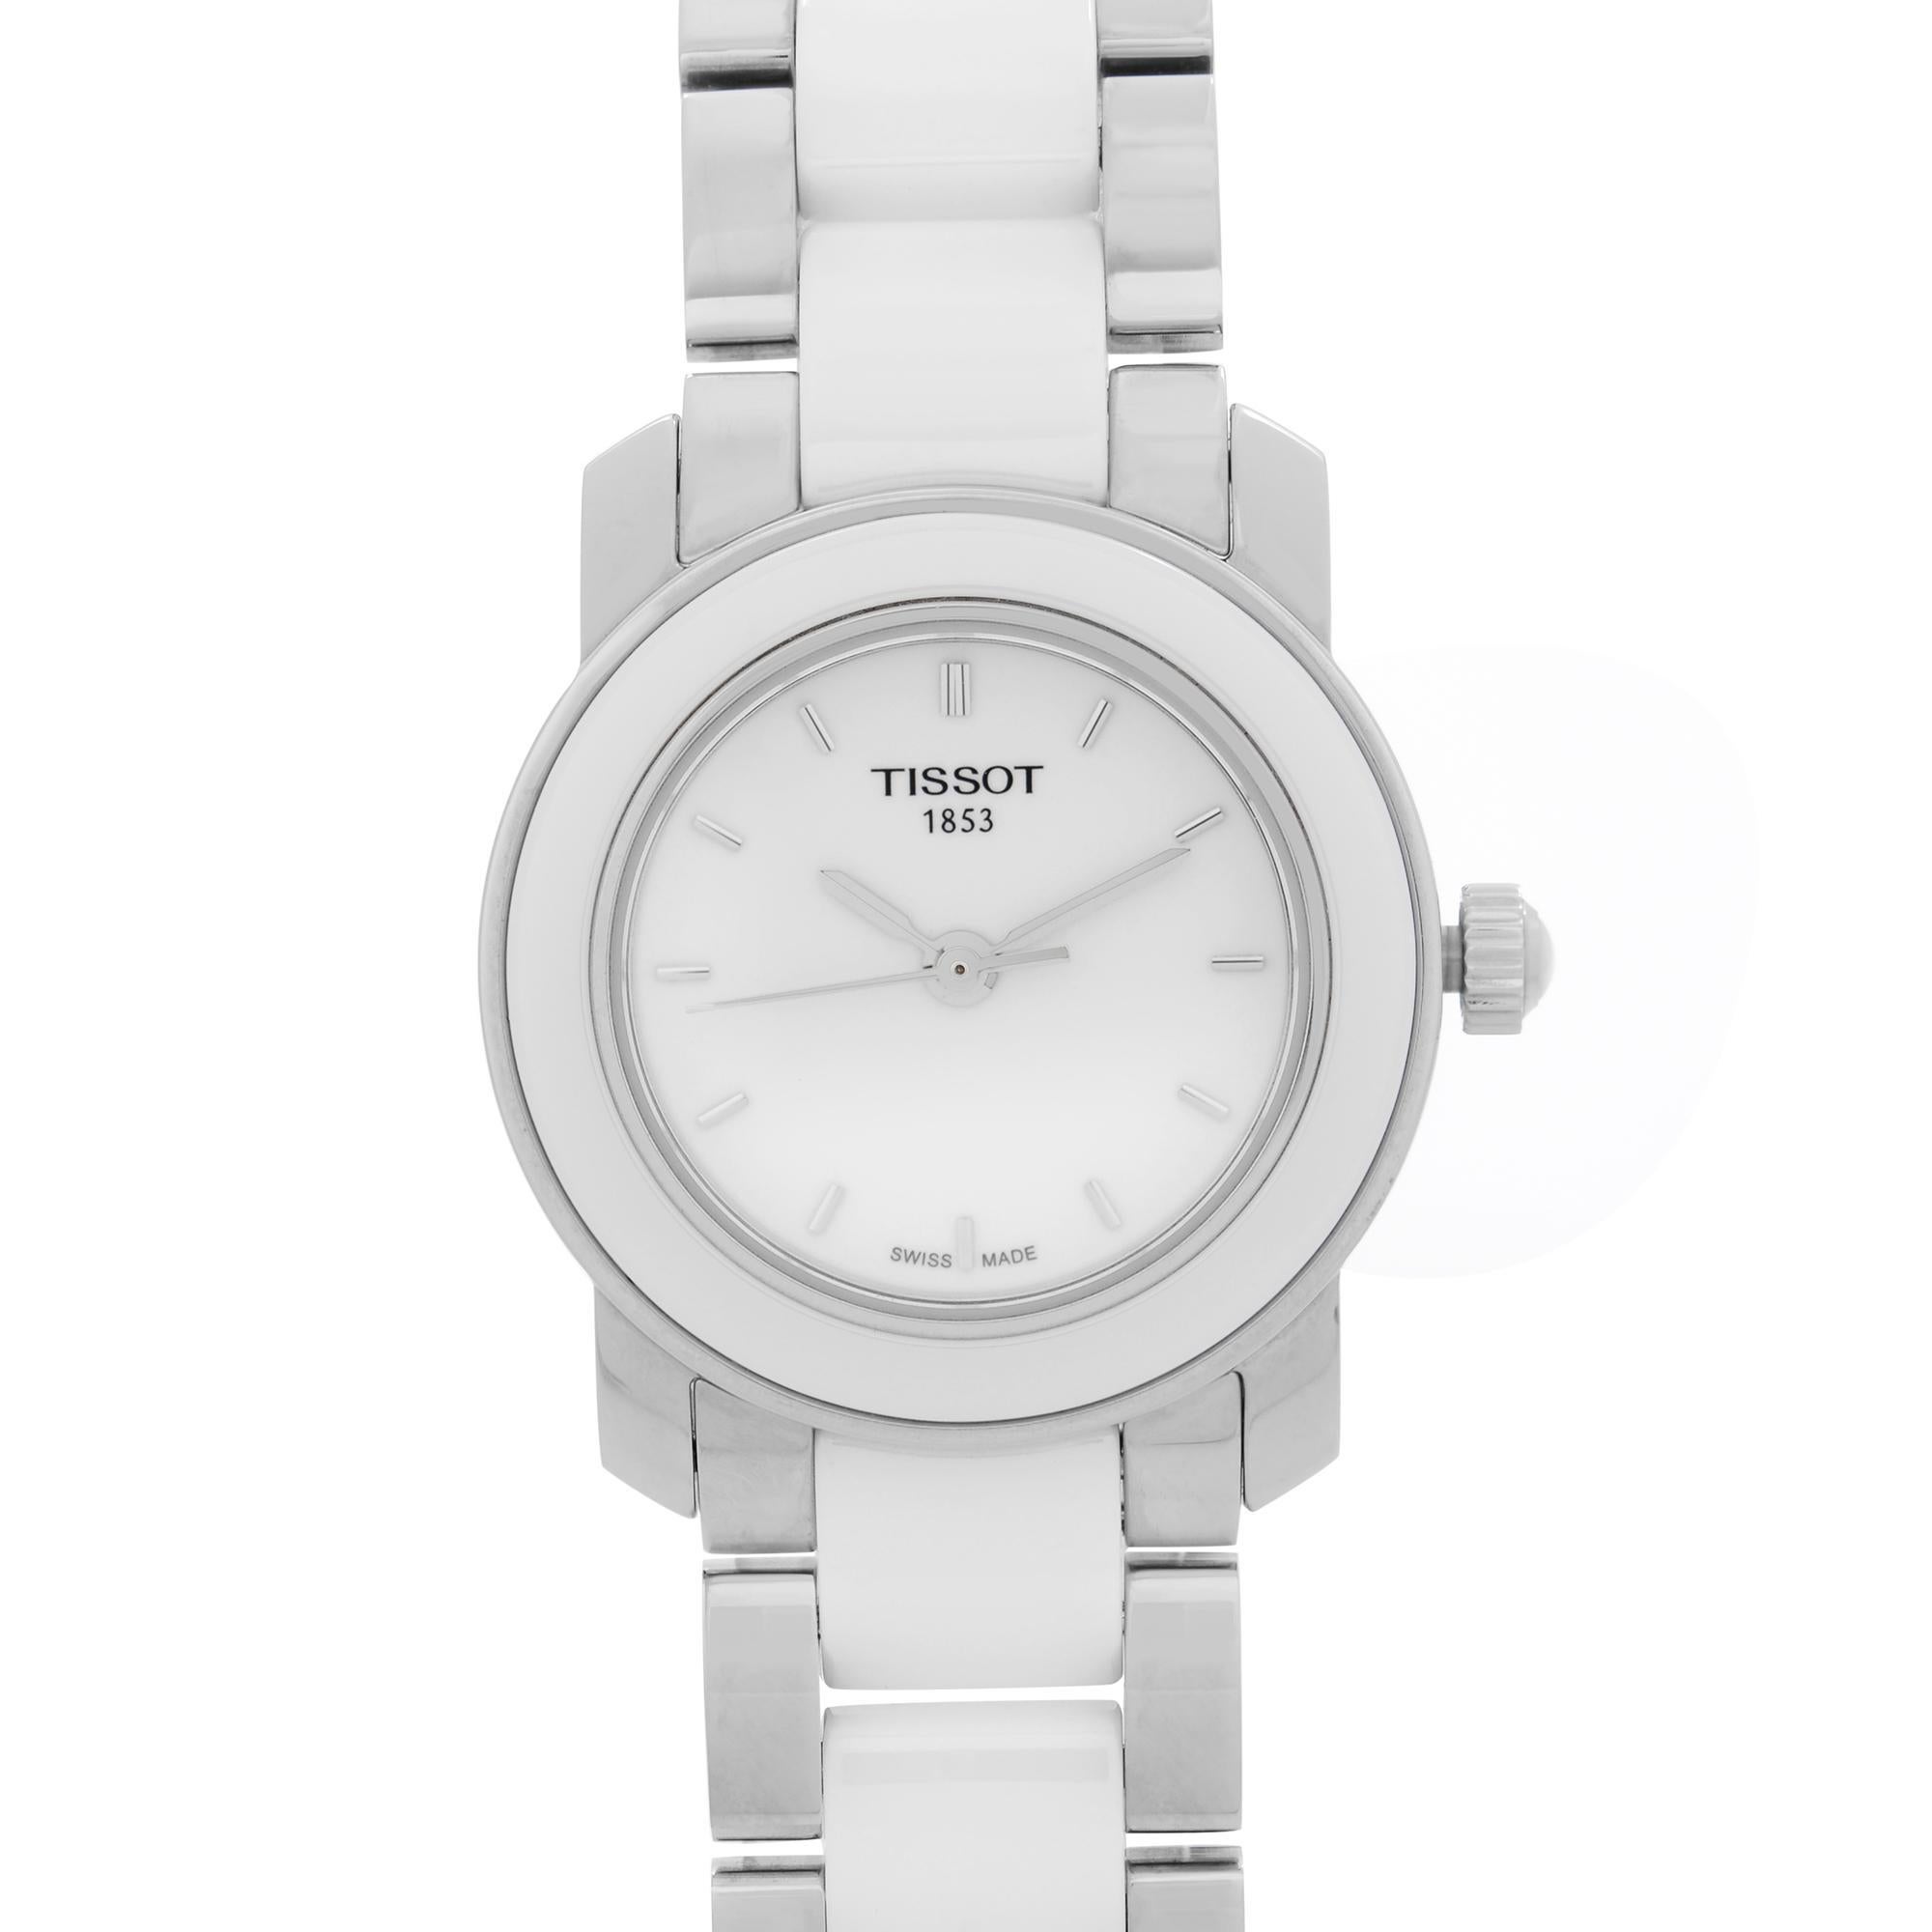 Display Model Tissot T-Trend Cera 28mm Ceramic Stainless Steel White Dial Ladies Quartz Watch T064.210.22.011.00. This timepiece is powered by Quartz (battery) movement with features: Stainless Steel Case and Stainless Steel bracelet with white